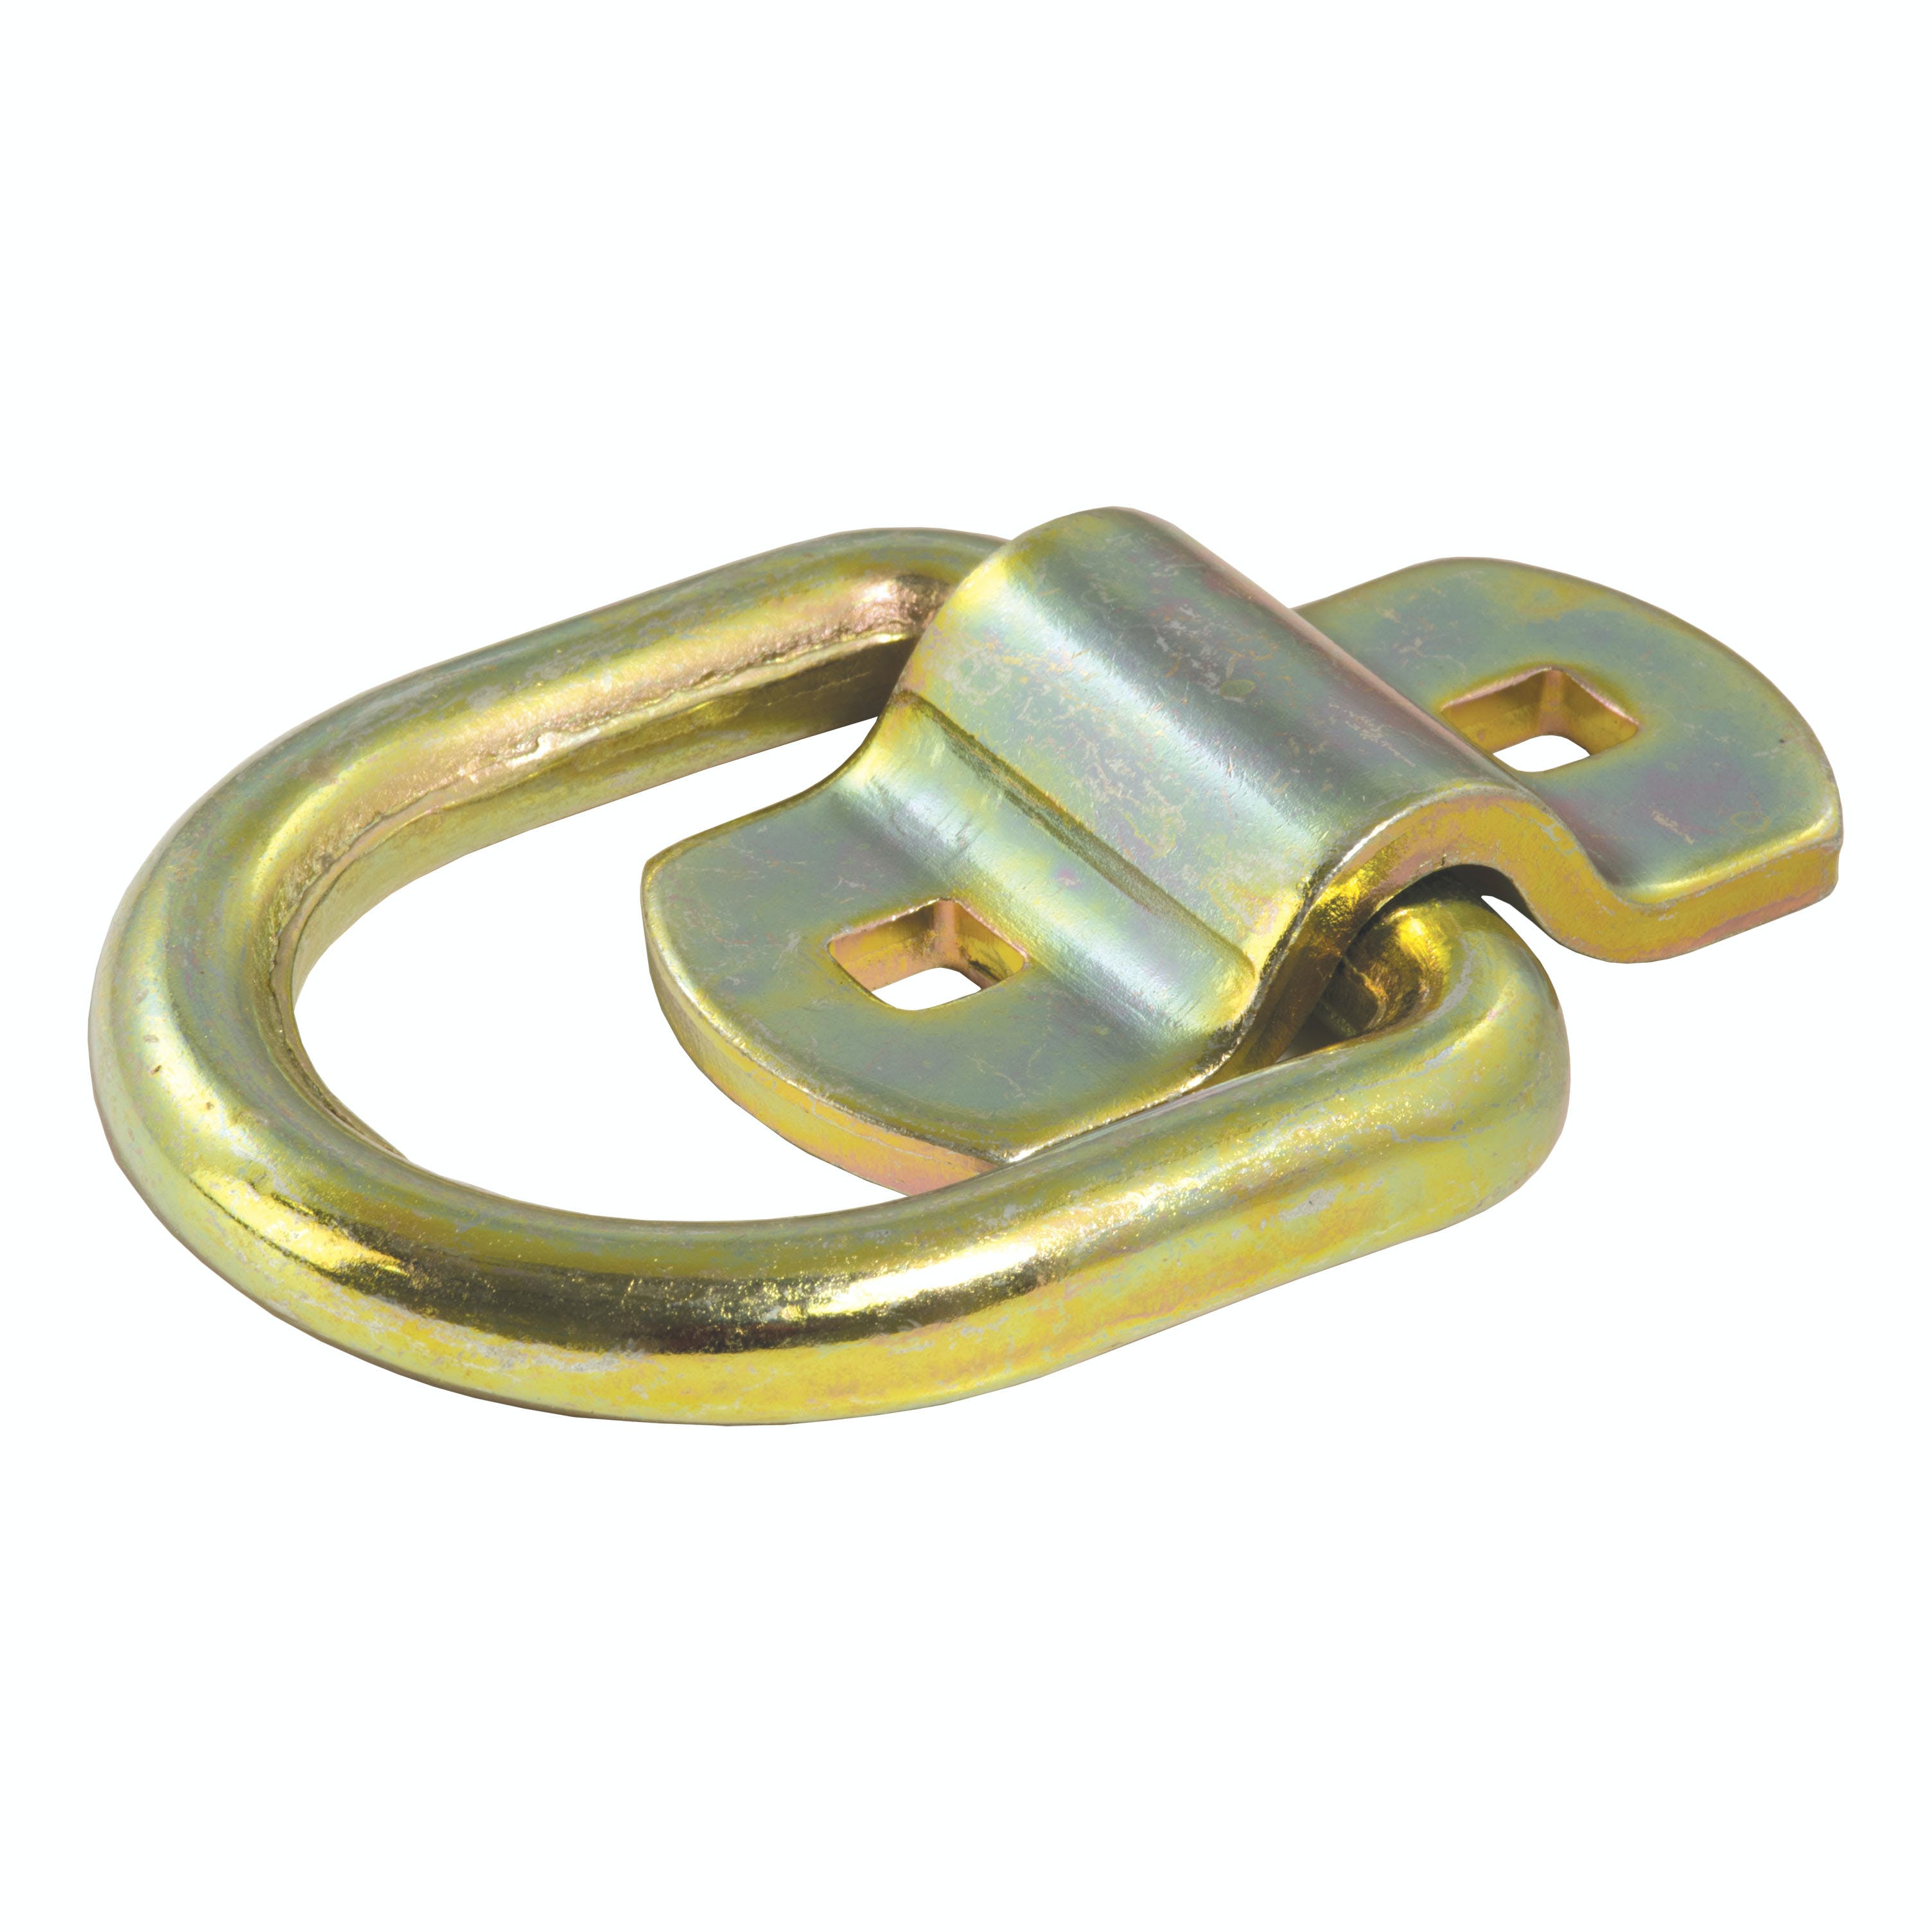 CURT 83740 3 x 3 Surface-Mounted Tie-Down D-Ring (3,600 lbs, Yellow Zinc)